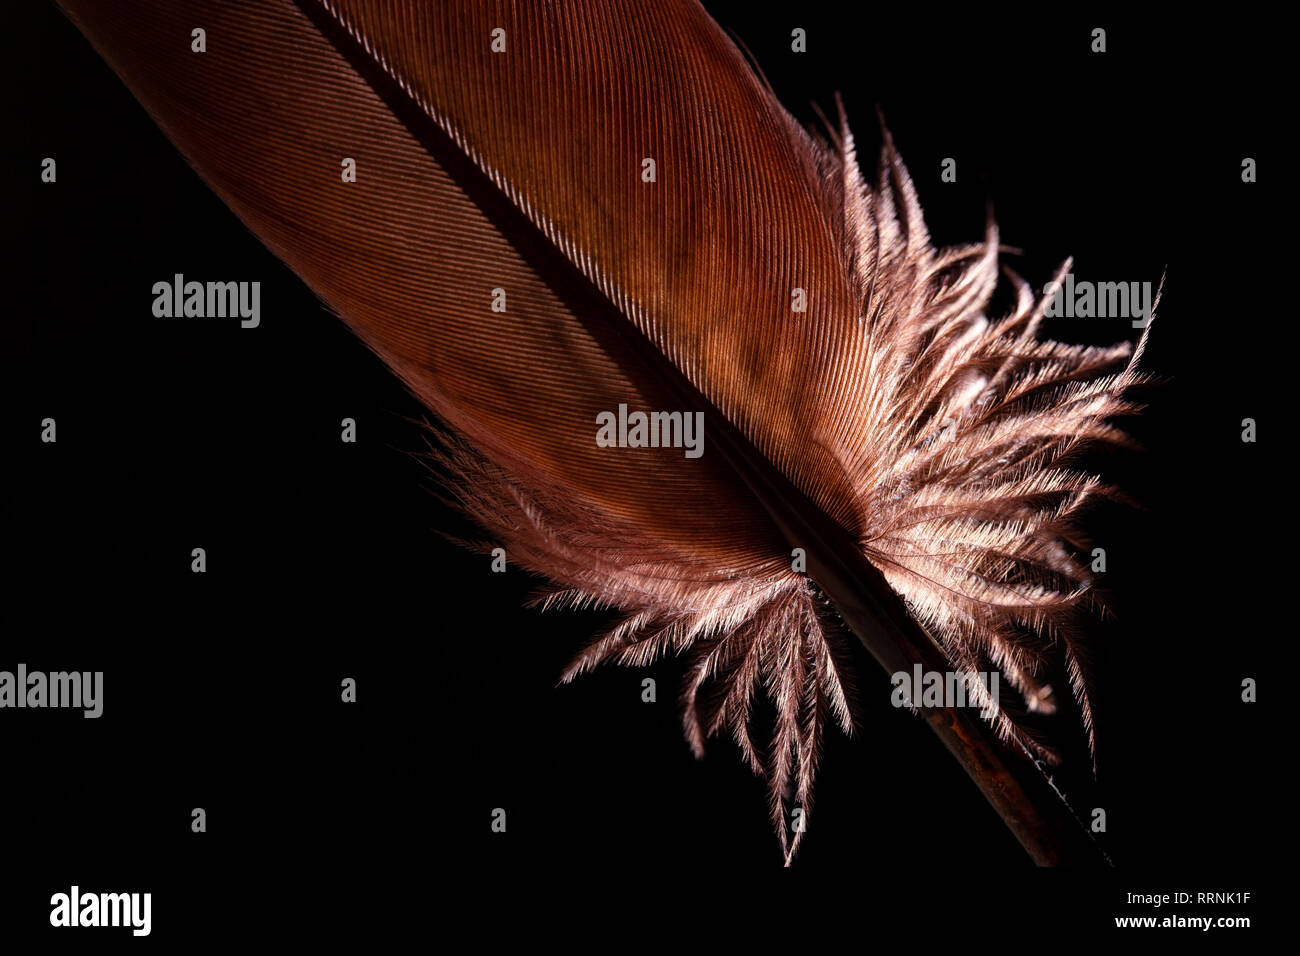 Brown feather on a dark background with backlight Stock Photo